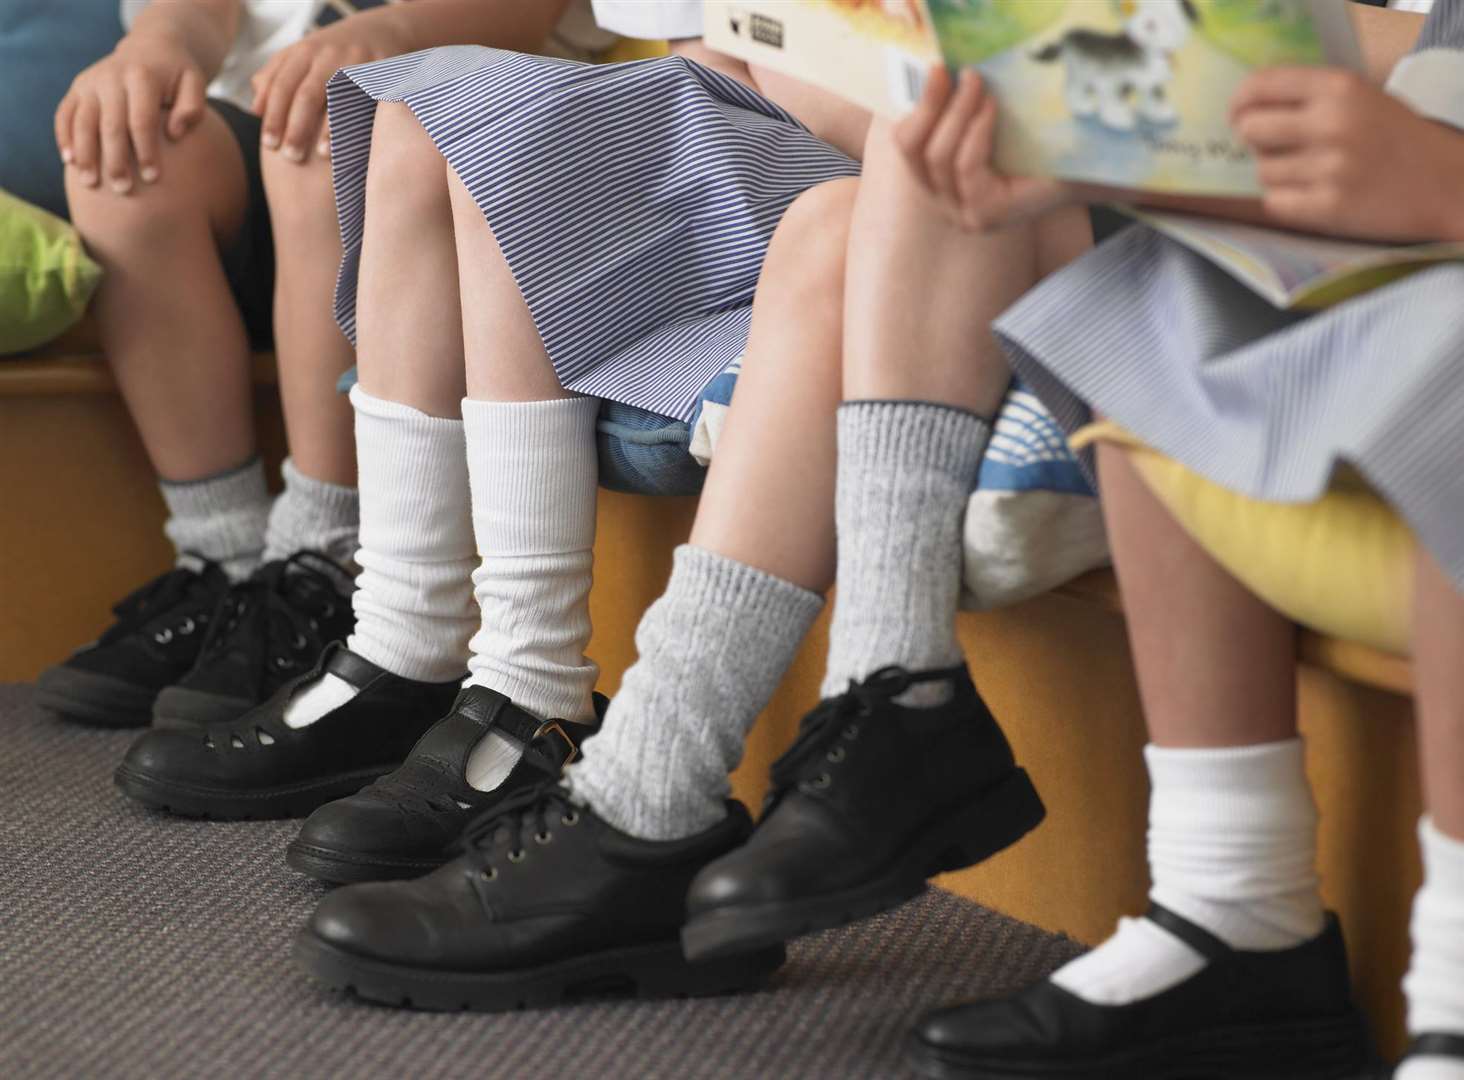 Features such as scuff-resistant materials, memory foam insoles and micro-fresh technology are saviours for parents, as school shoes have never lasted so long before